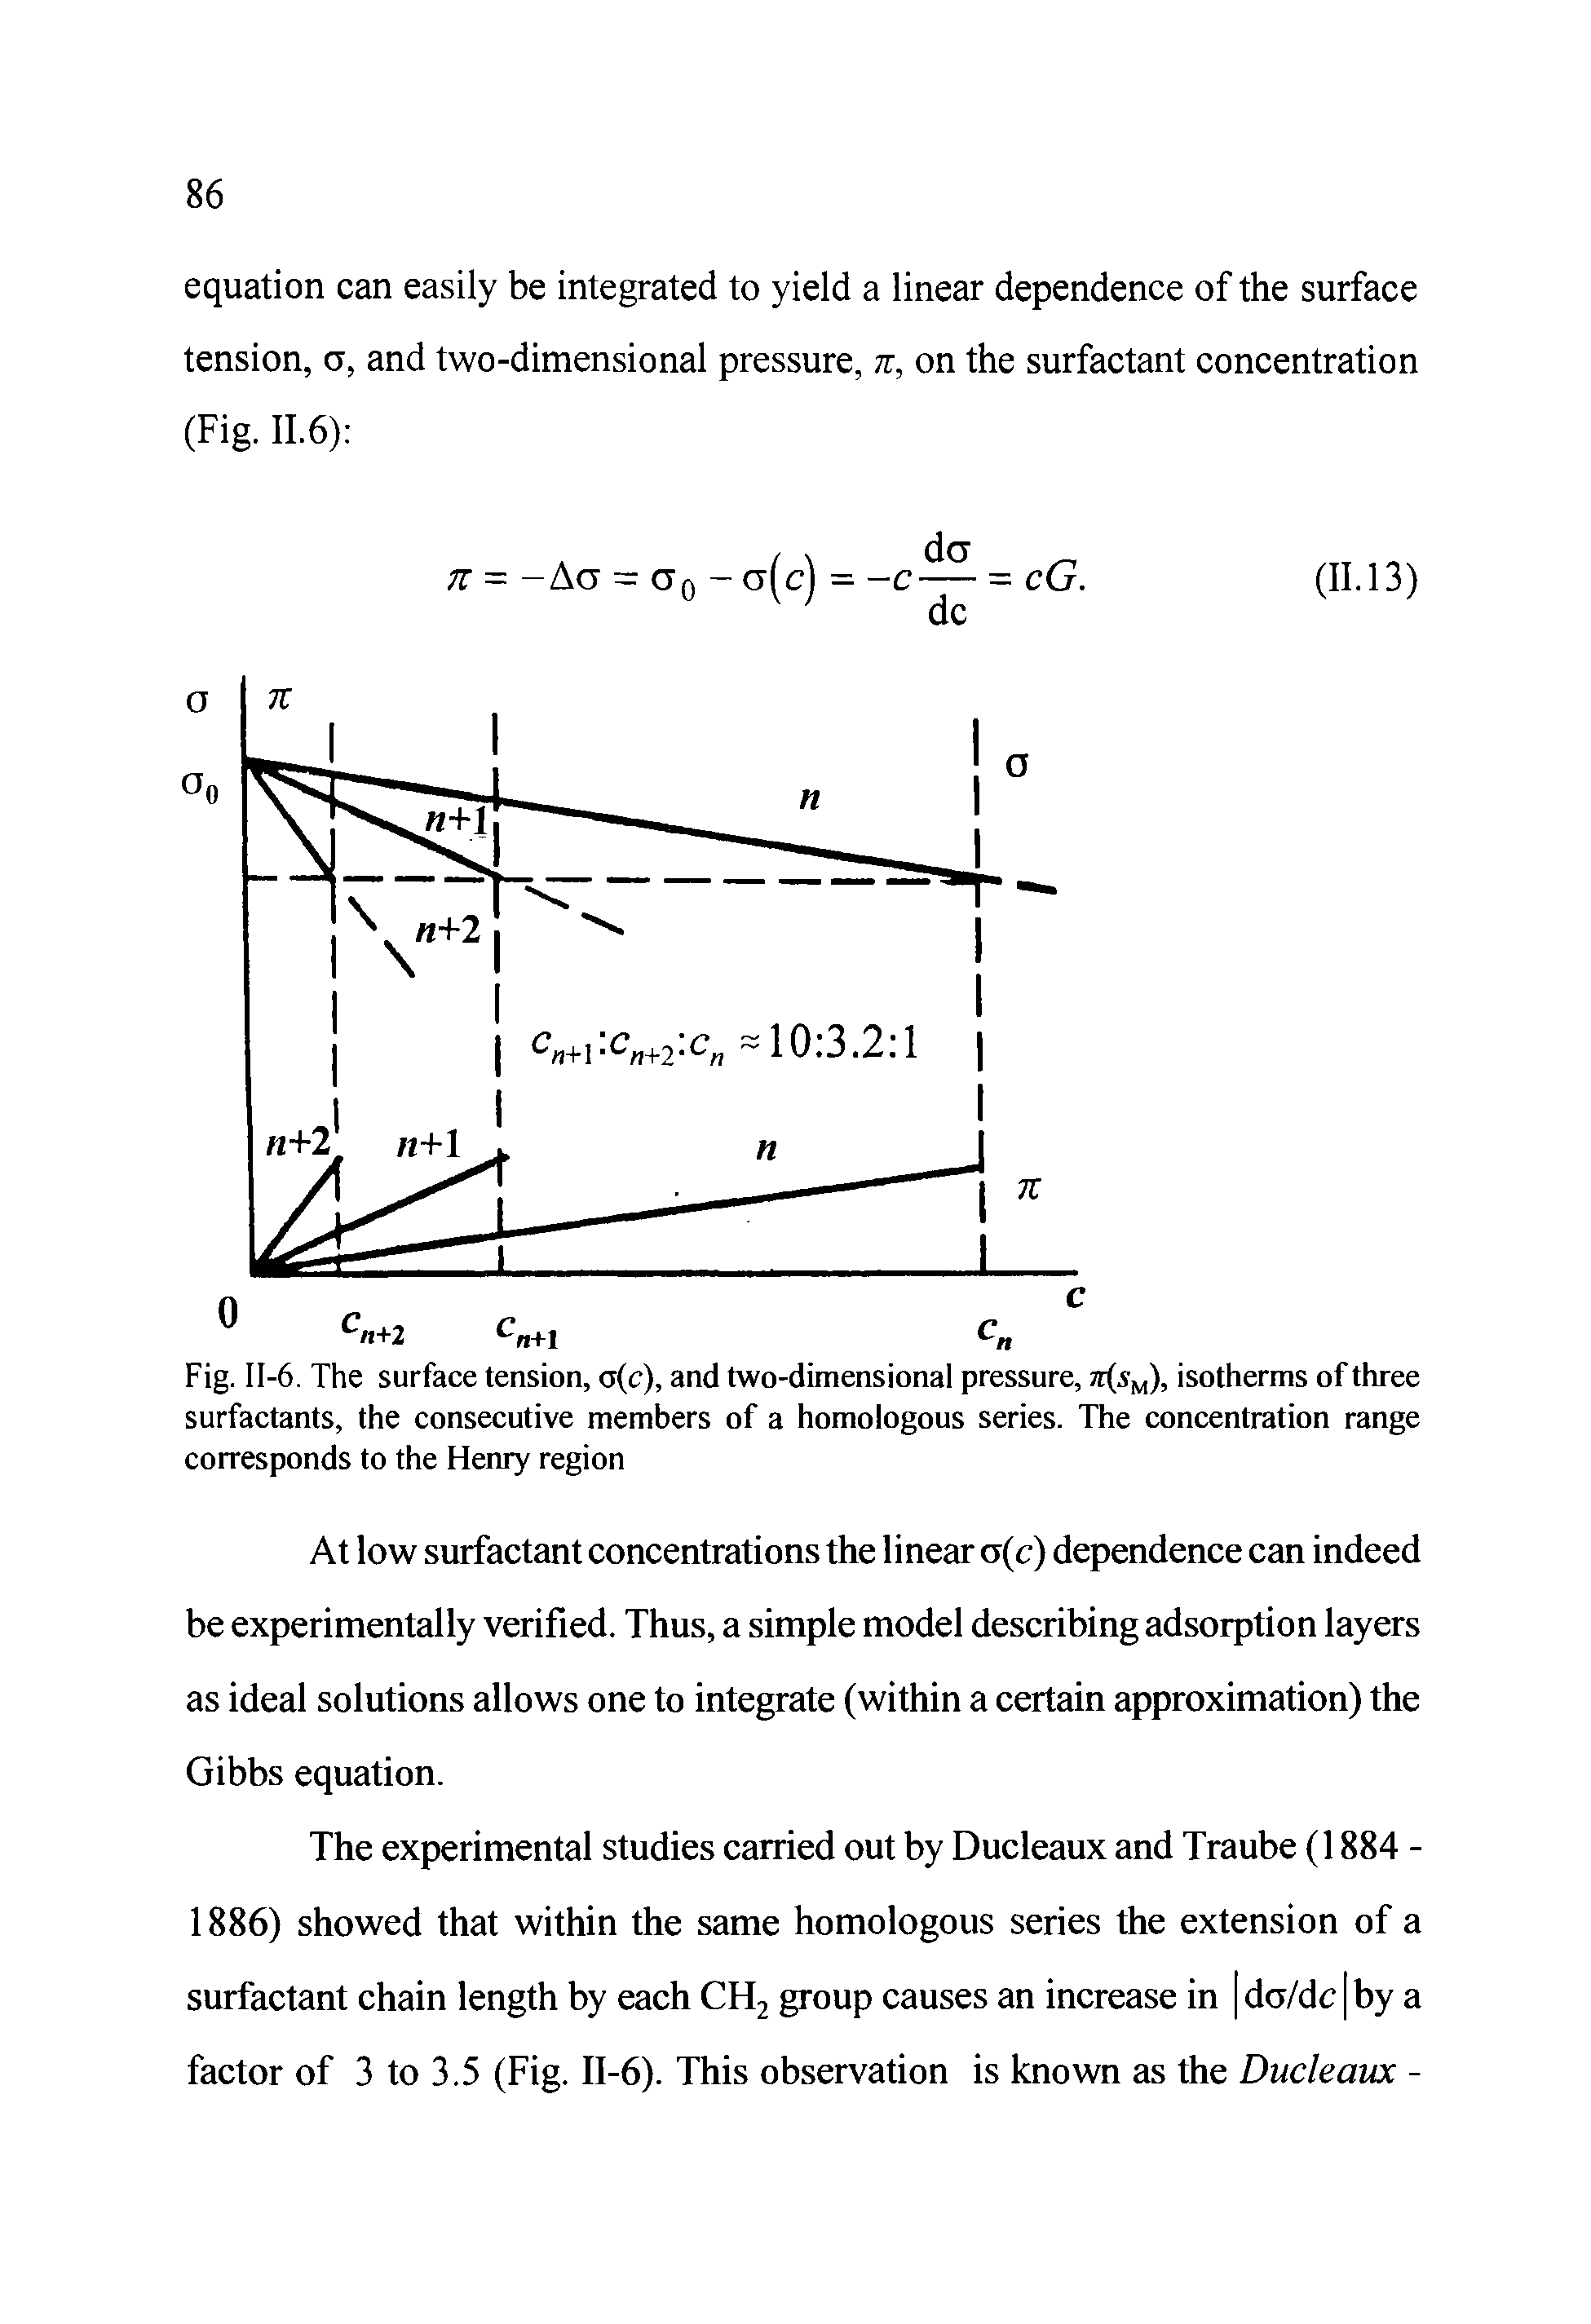 Fig. II-6. The surface tension, a(c), and two-dimensional pressure, tt(.vm), isotherms of three surfactants, the consecutive members of a homologous series. The concentration range corresponds to the Henry region...